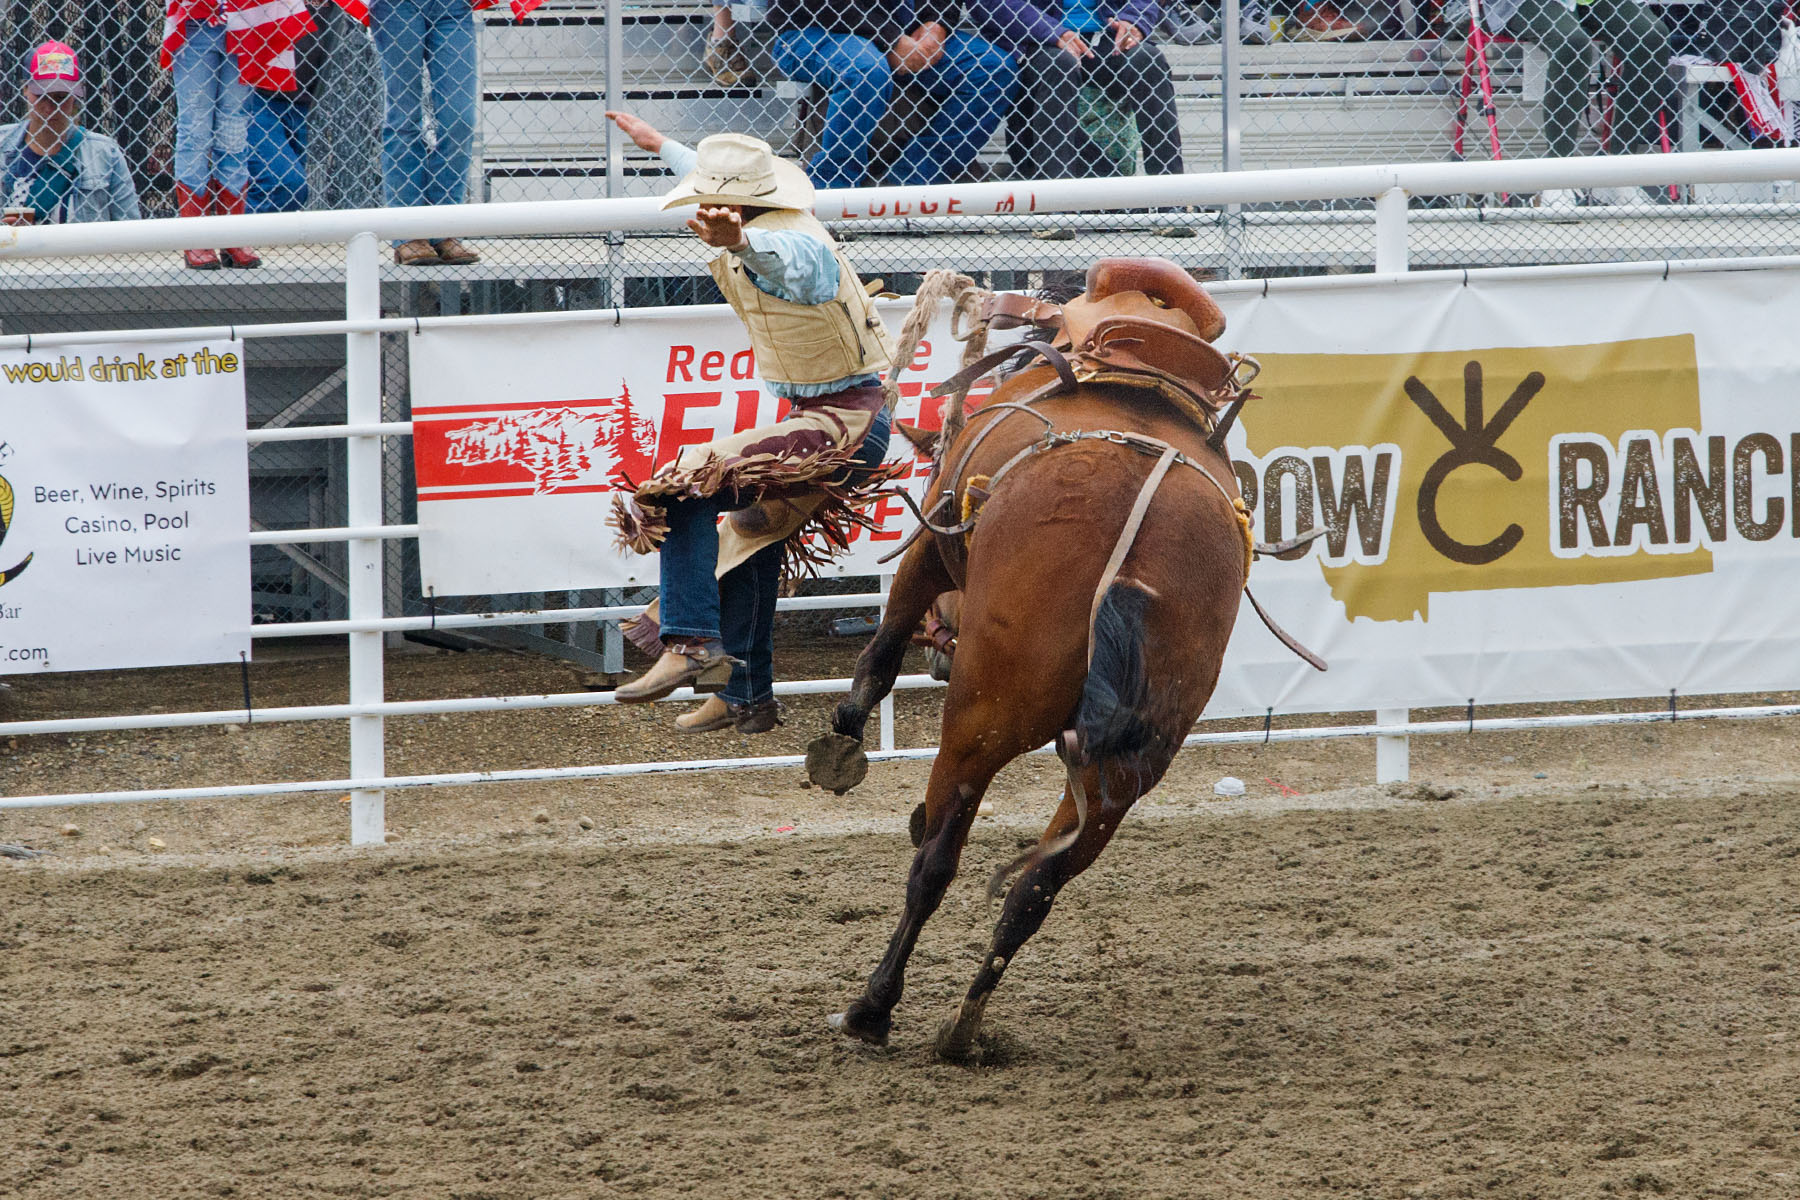 Saddle Bronc, Home of Champions Rodeo, Red Lodge, MT.  Click for next photo.